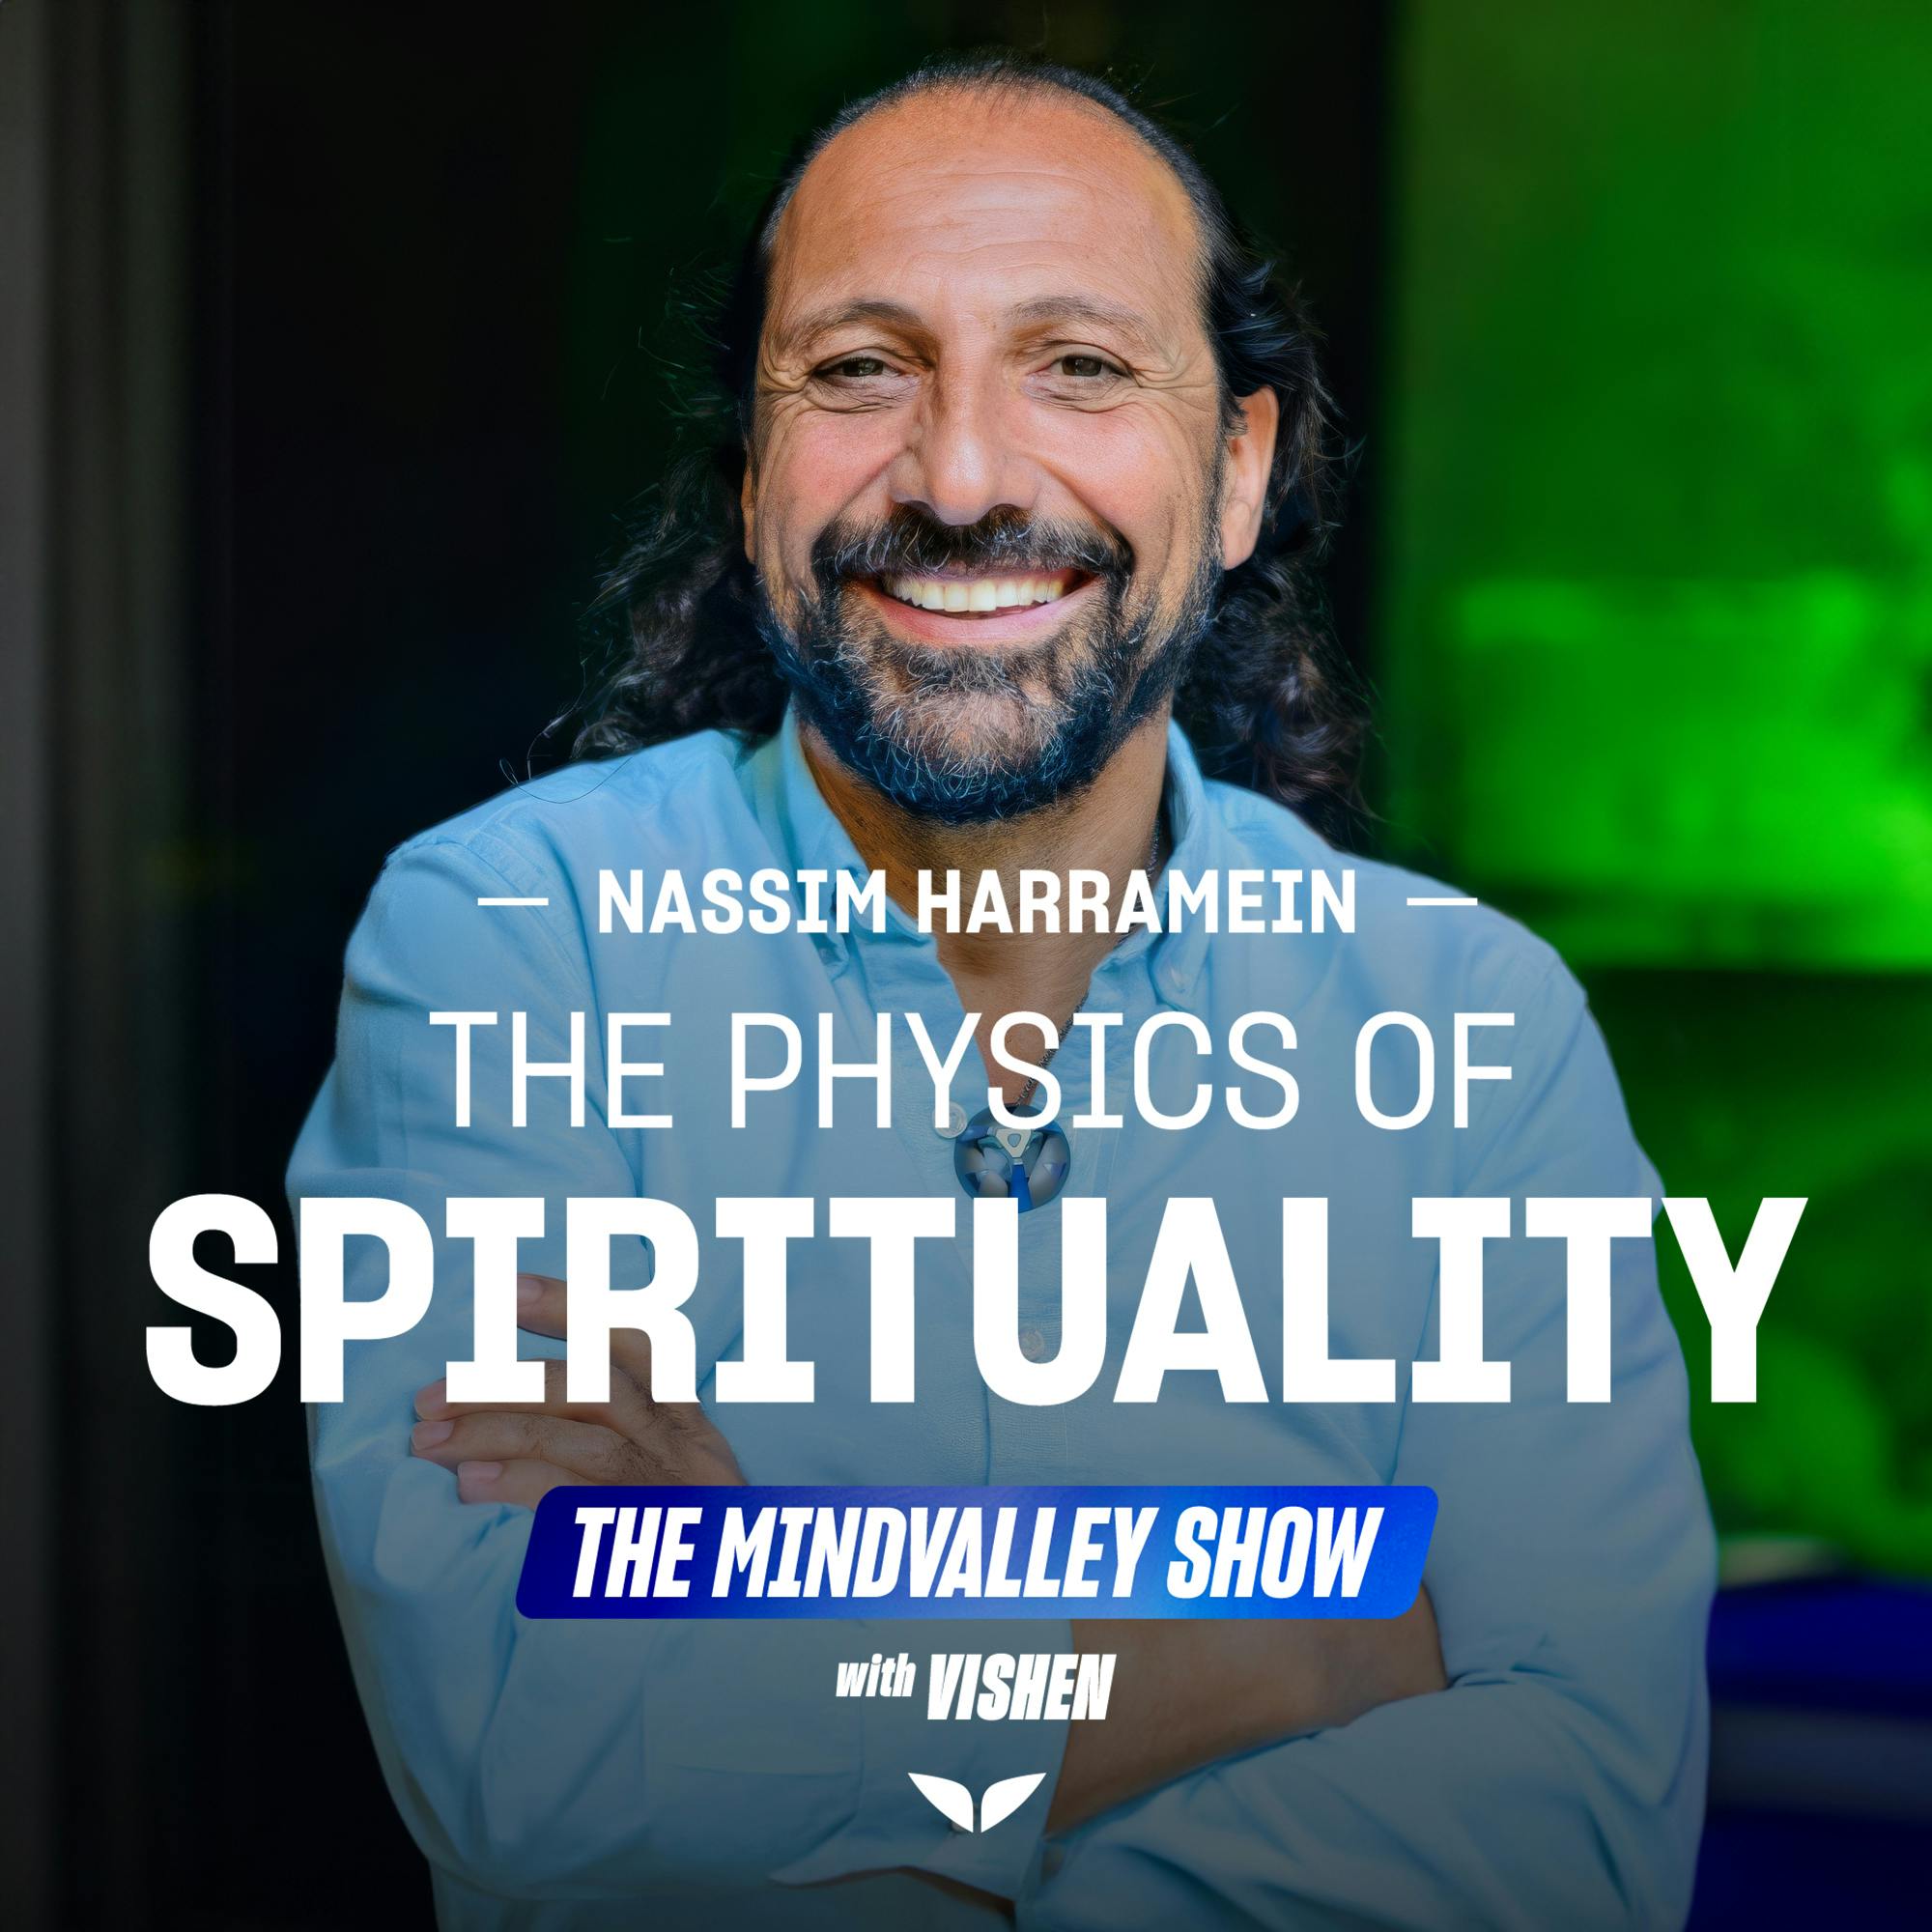 Nassim Haramein on the Science behind Spirituality